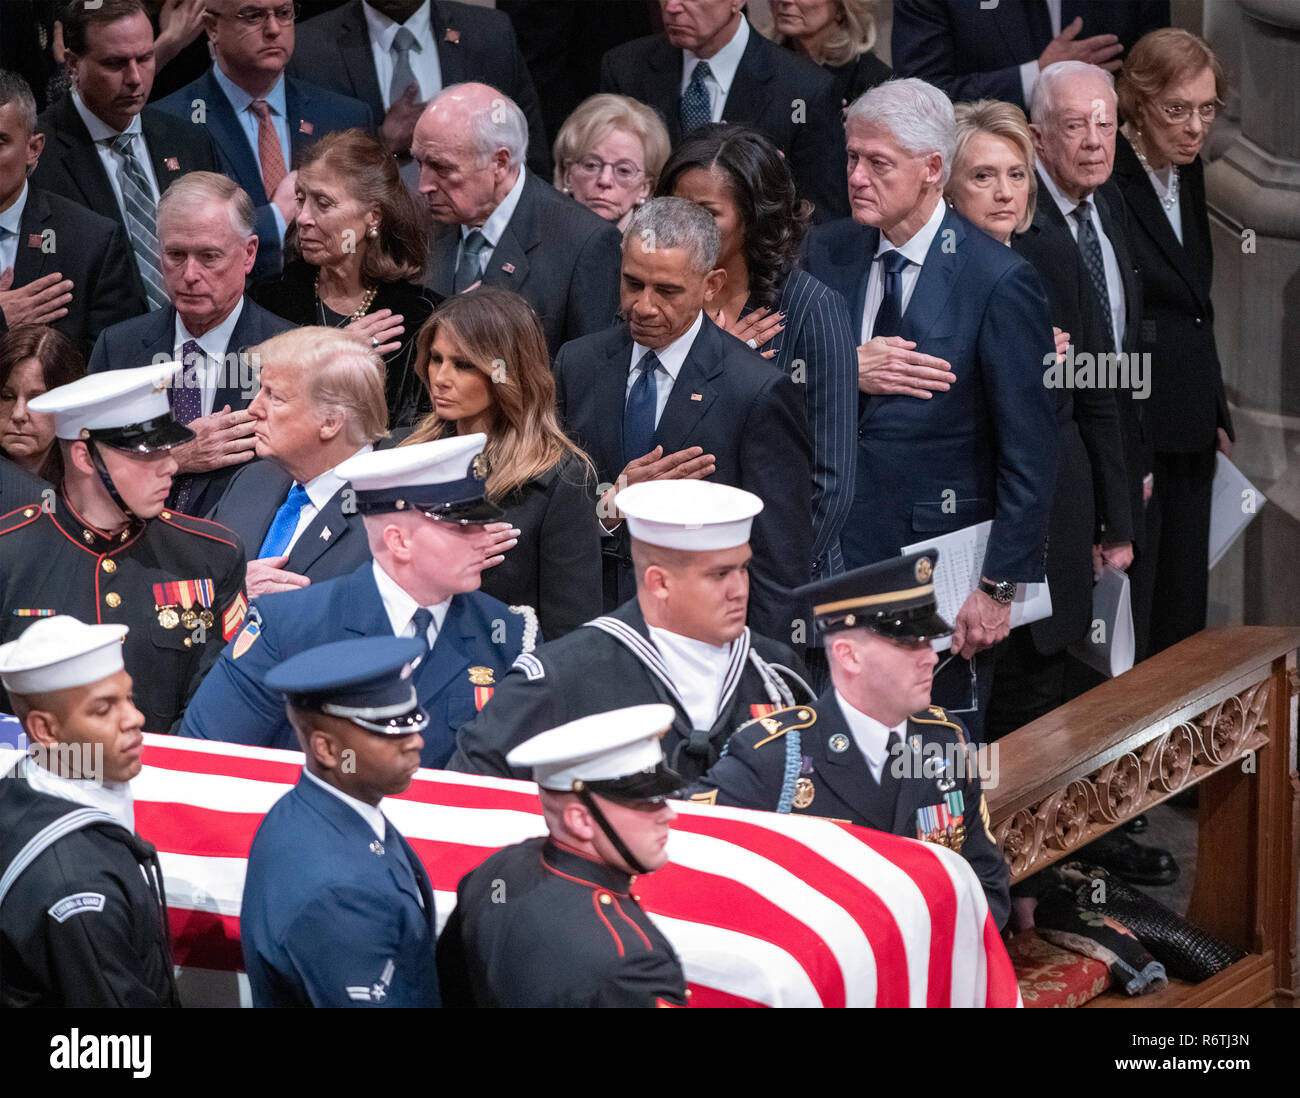 Dignitaries pay their respects as the casket containing the remains of the late former United States President George H.W. Bush at the National funeral service in his honor at the Washington National Cathedral in Washington, DC on Wednesday, December 5, 2018. Front row: United States President Donald J. Trump, first lady Melania Trump, former US President Barack Obama, former US President Bill Clinton, former US Secretary of State Hillary Rodham Clinton, former US President Jimmy Carter and former first lady Rosalynn Carter. Second row: former US Vice President Dan Quayle, Marilyn Quayle, for Stock Photo